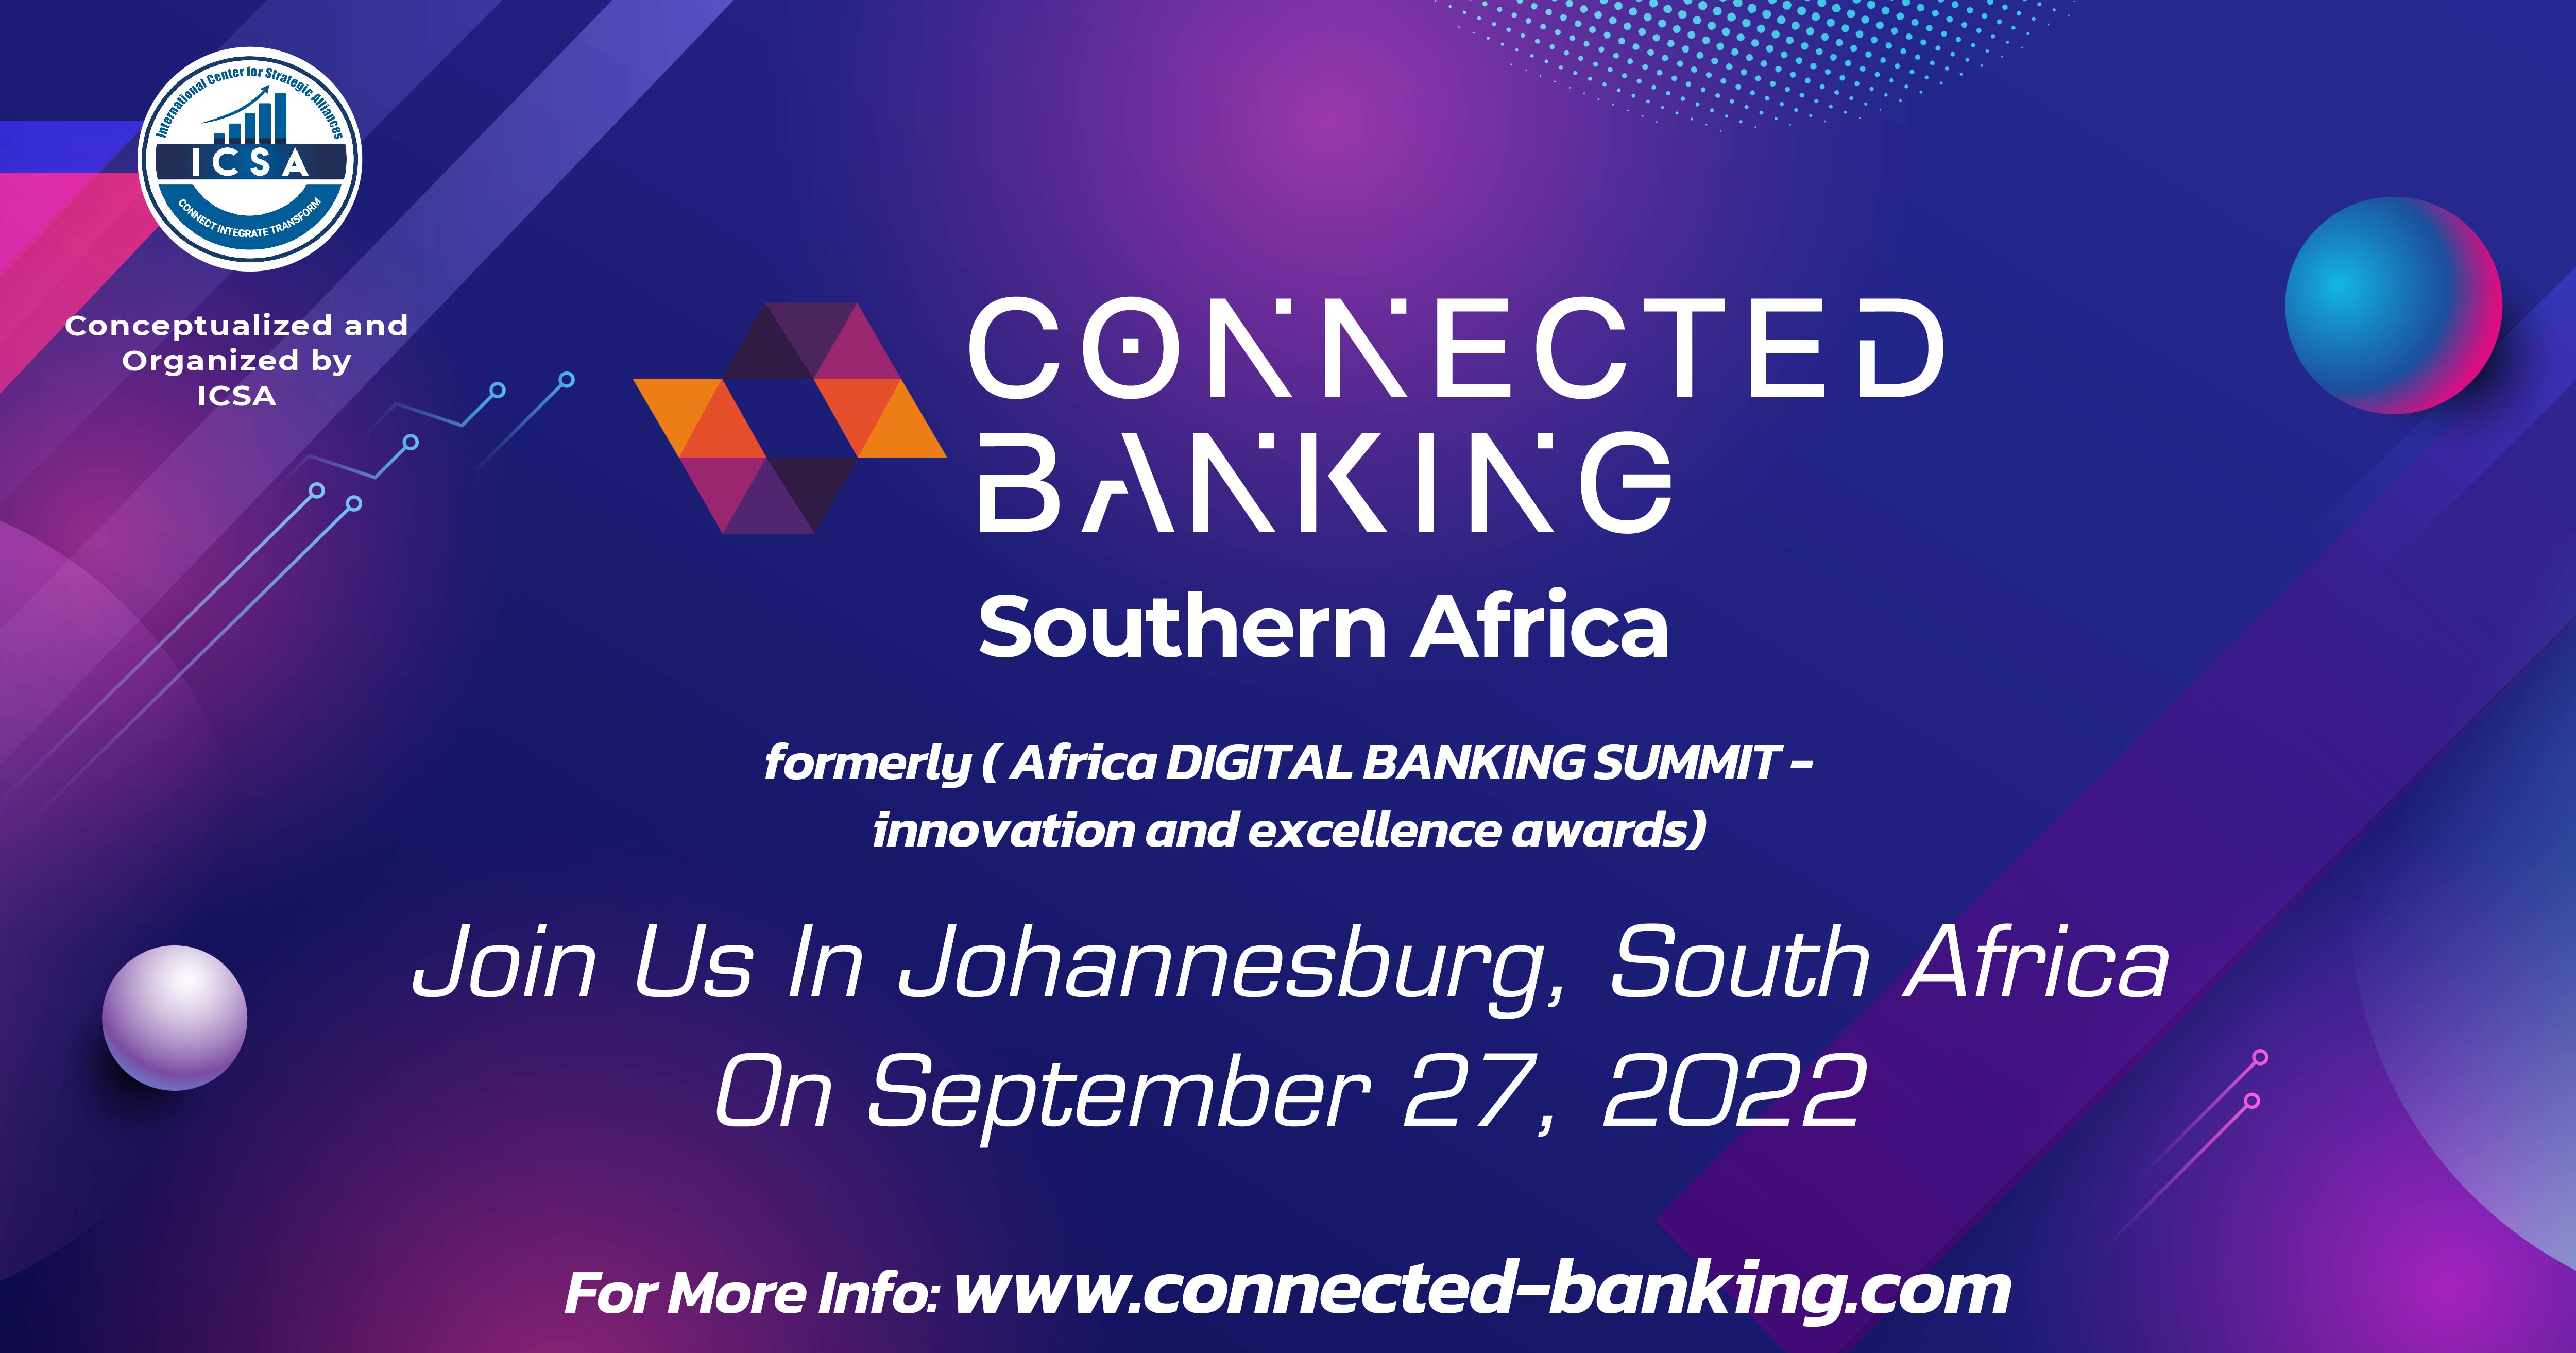 5th Edition Connected Banking South Africa- Formerly Africa Digital Banking Summit organized by International Center for Strategic Alliance